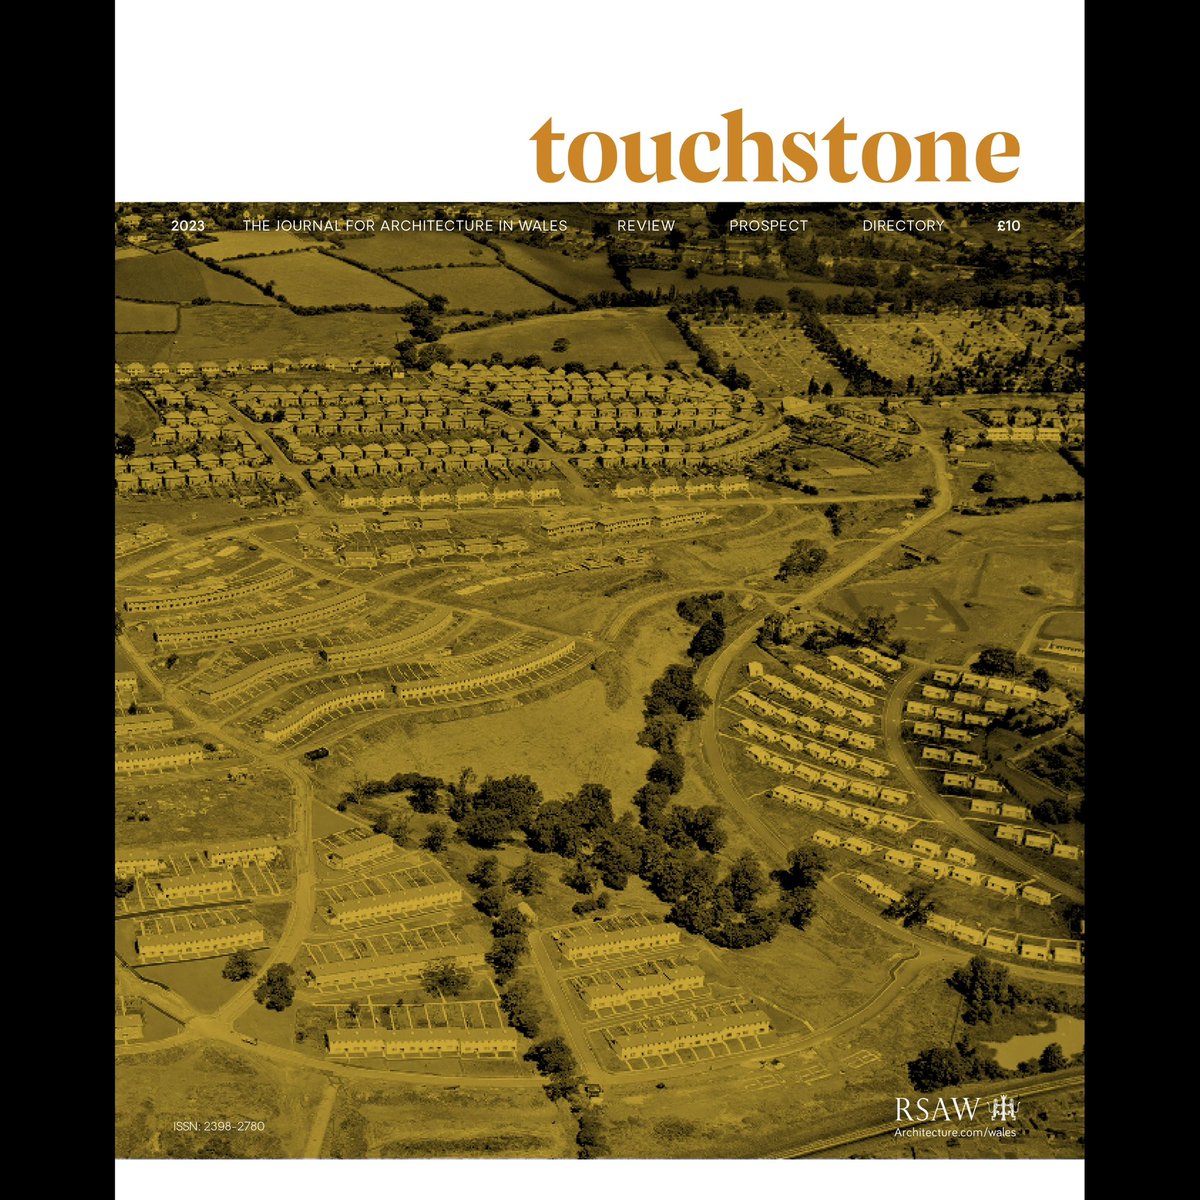 Just published in the @The_RSAW’s ‘Touchstone’ magazine for 2023, my article ‘Municipal master’, which records the life and work of Johnson Blackett (1896-1984) - the epitome in Wales of an architect as public servant. @C20Cymru @C20Society @RCAHMWales